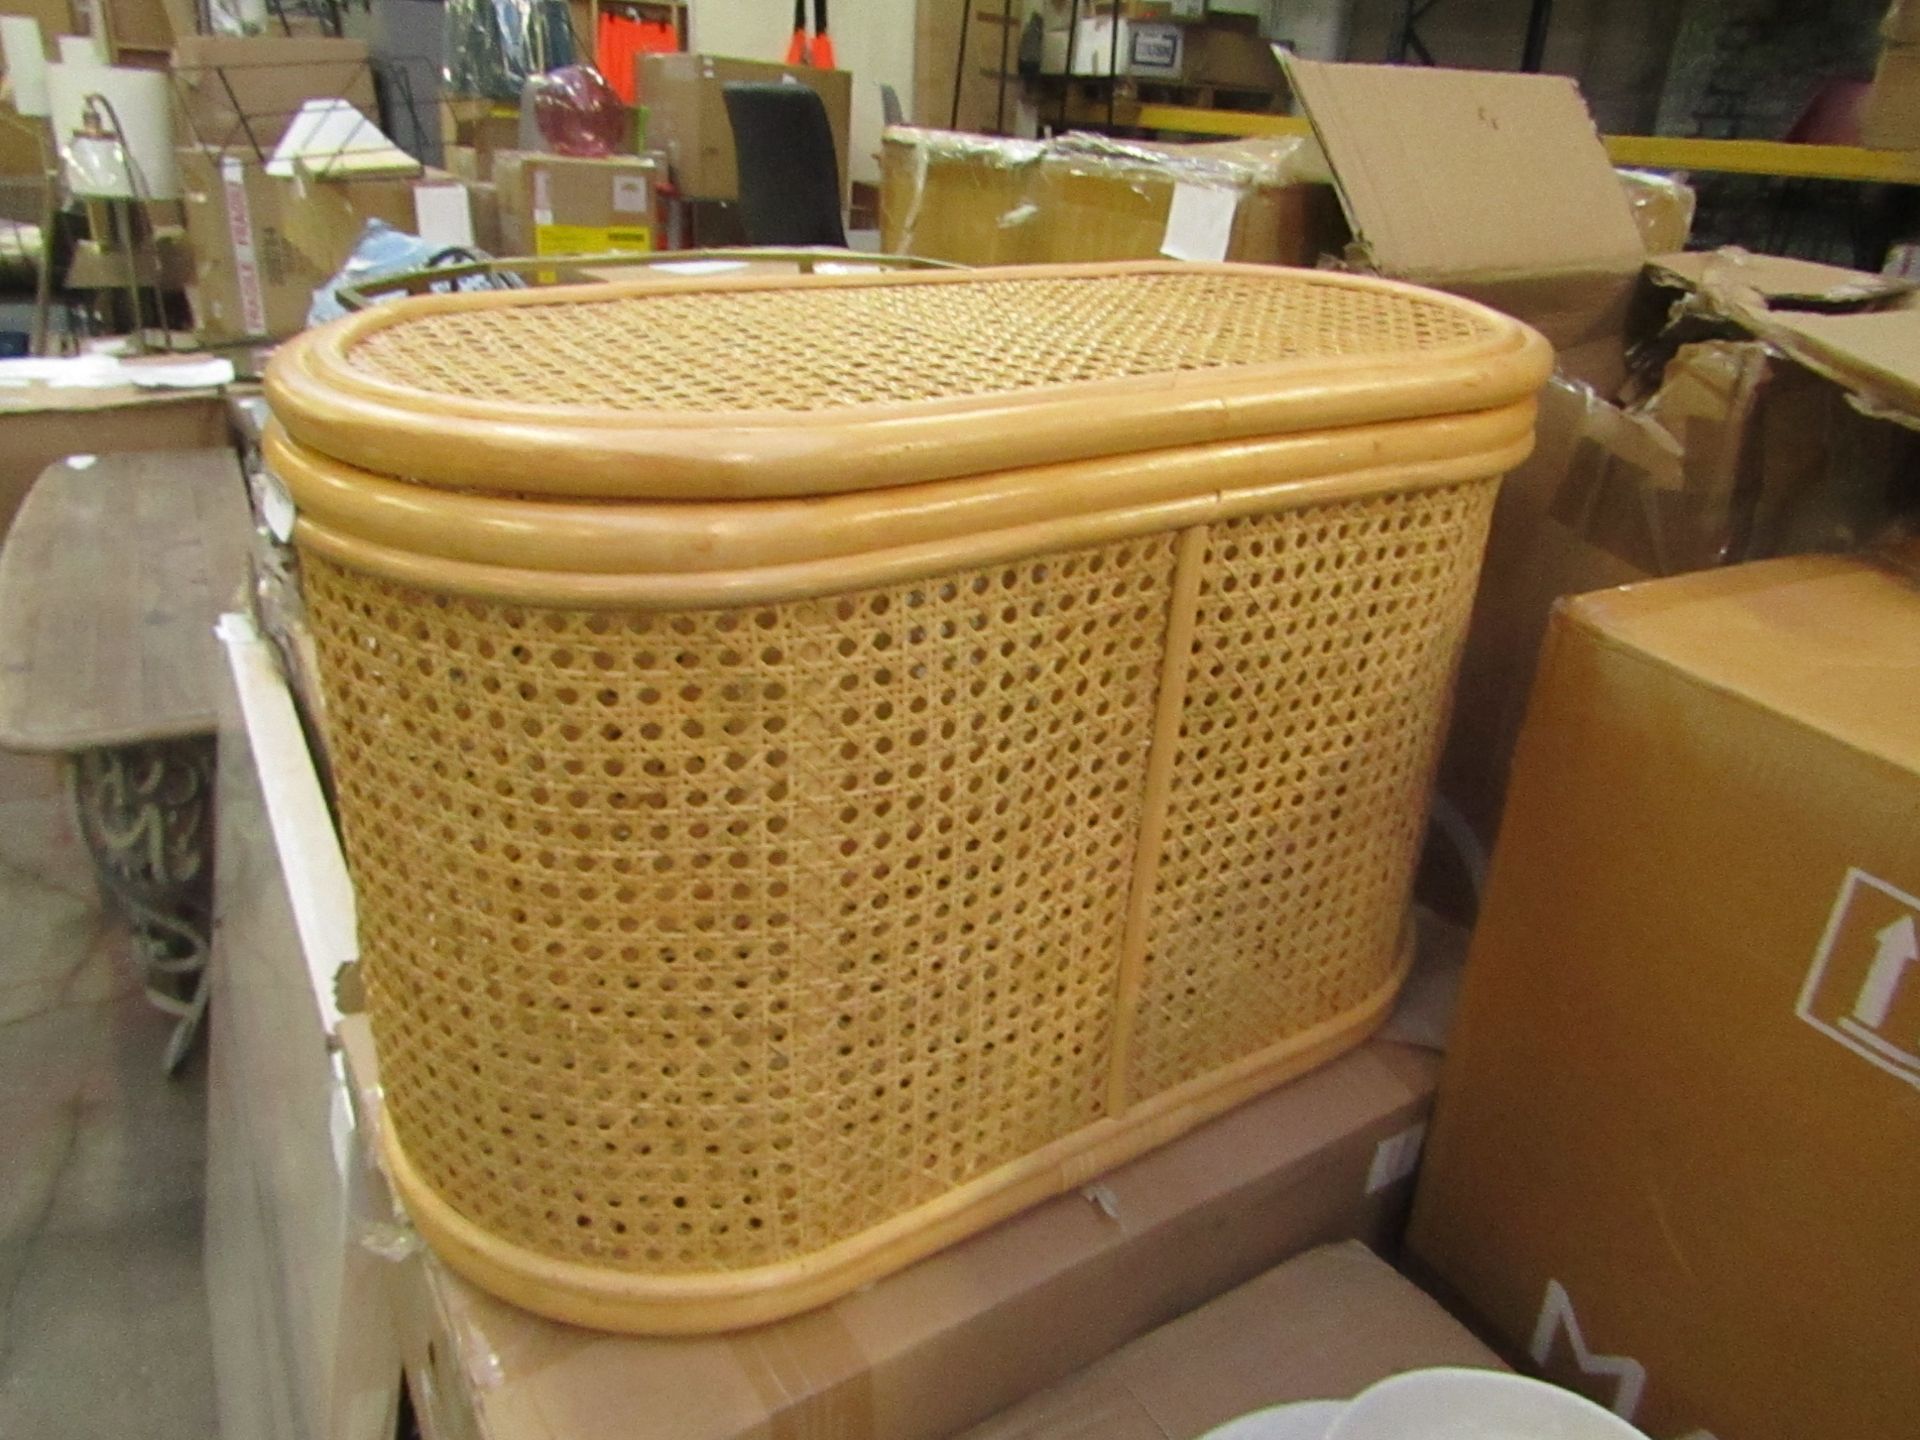 1 x Made.com Clare Trunk Natural Rattan £119 SKU MAD-AP-STOCLA008NAT-UK TOTAL RRP £119 This lot is a